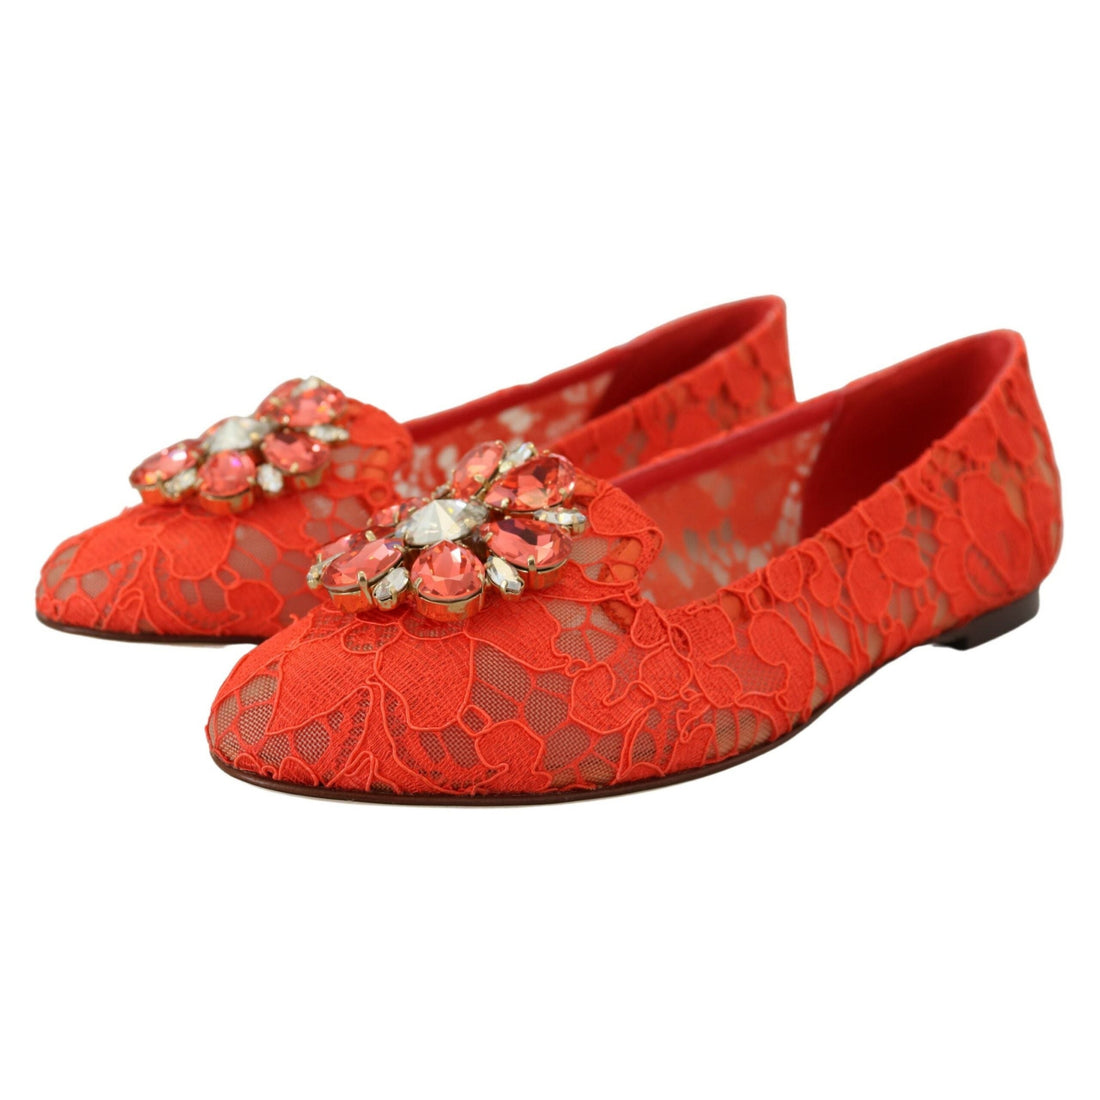 Dolce & Gabbana Elegant Lace Vally Flats in Coral Red